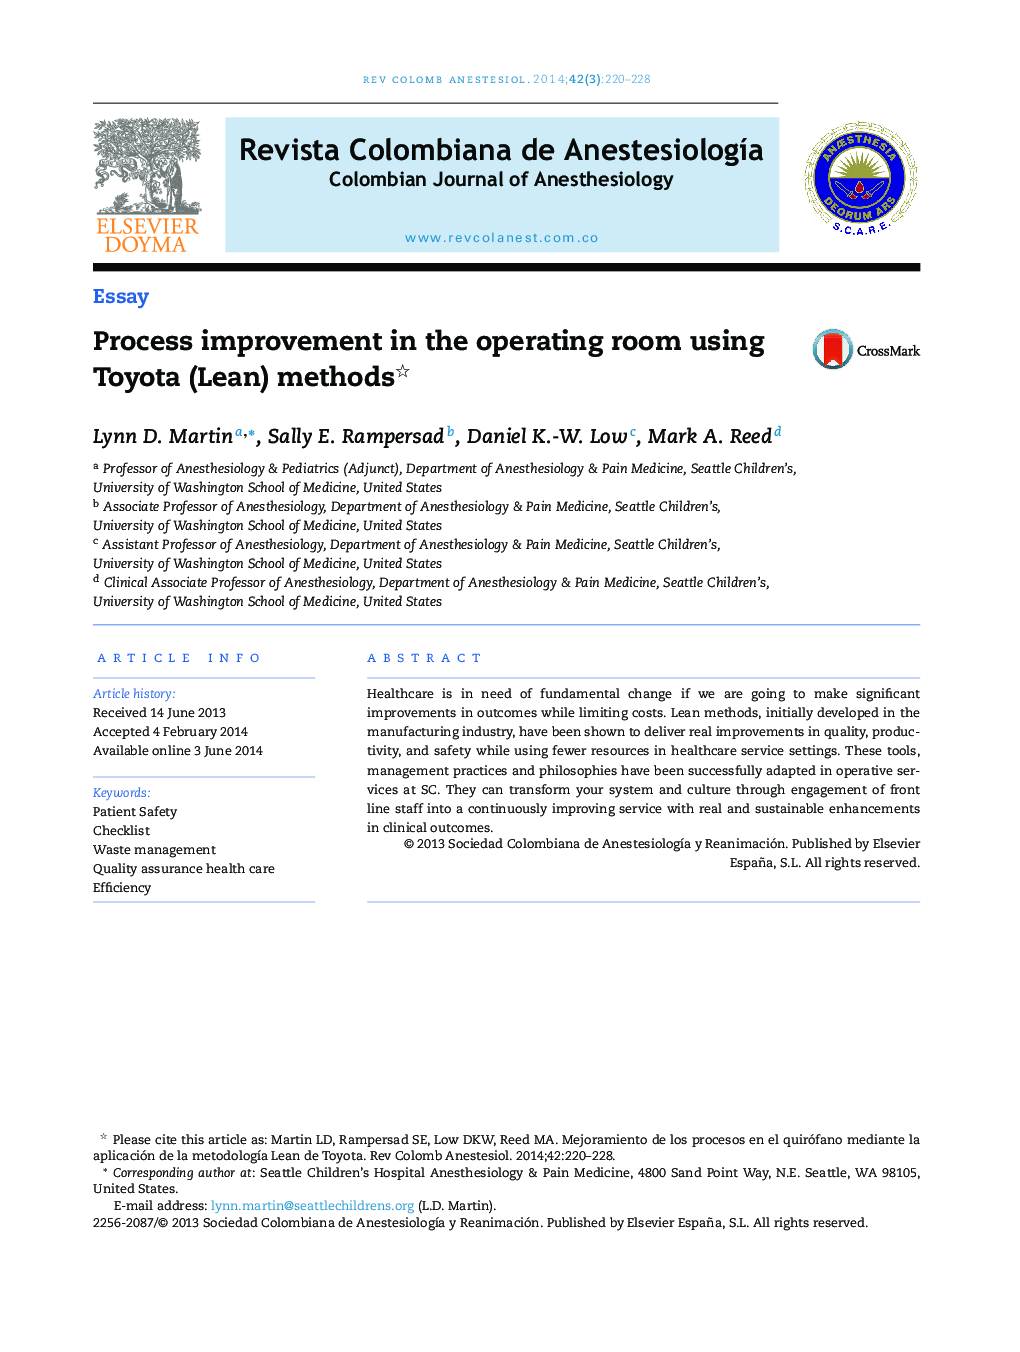 Process improvement in the operating room using Toyota (Lean) methods 